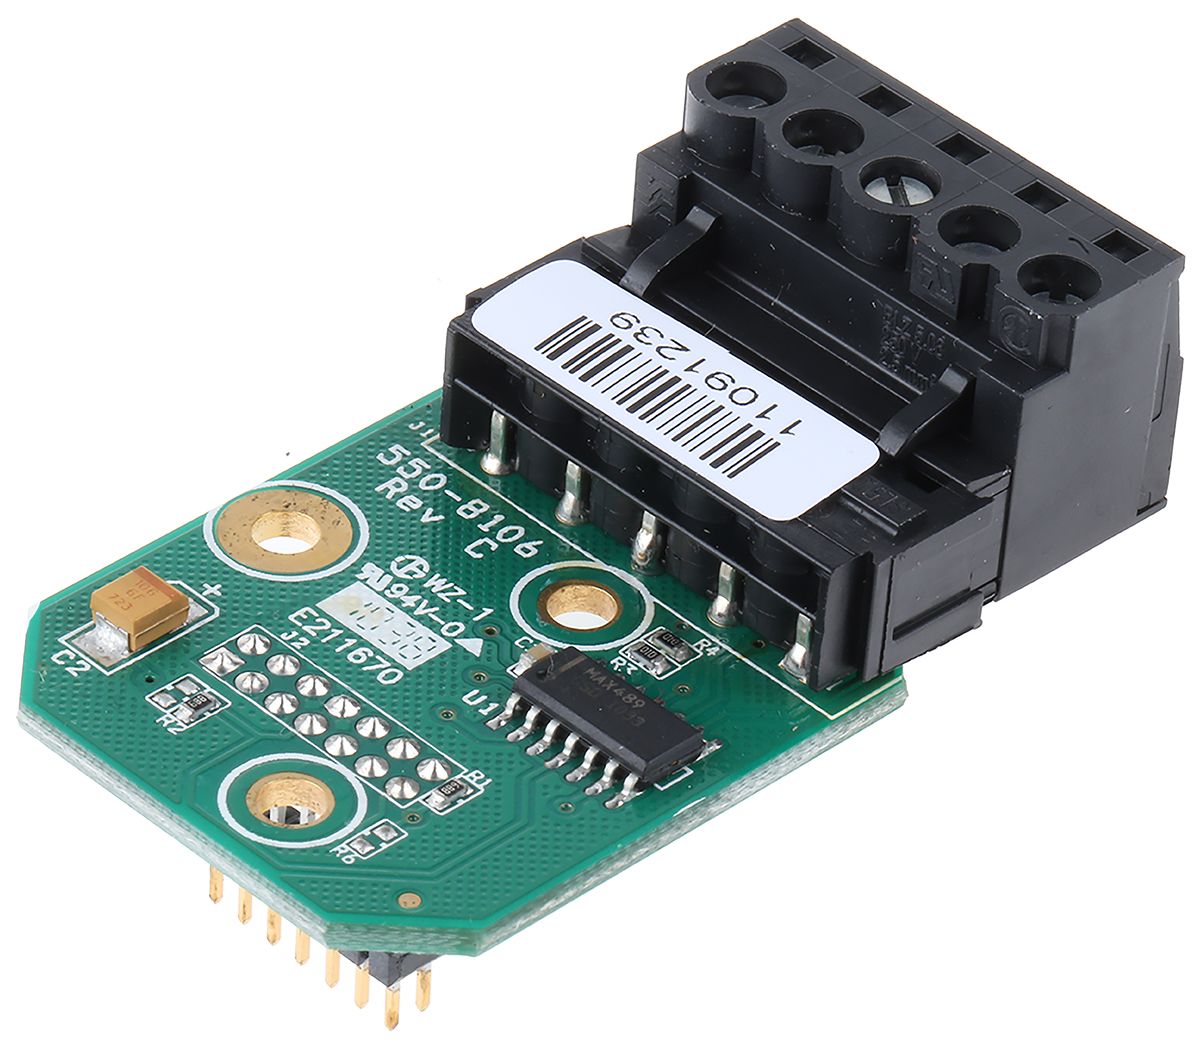 Applied Motion Systems Network Module für ST10-Si, ST5-Si